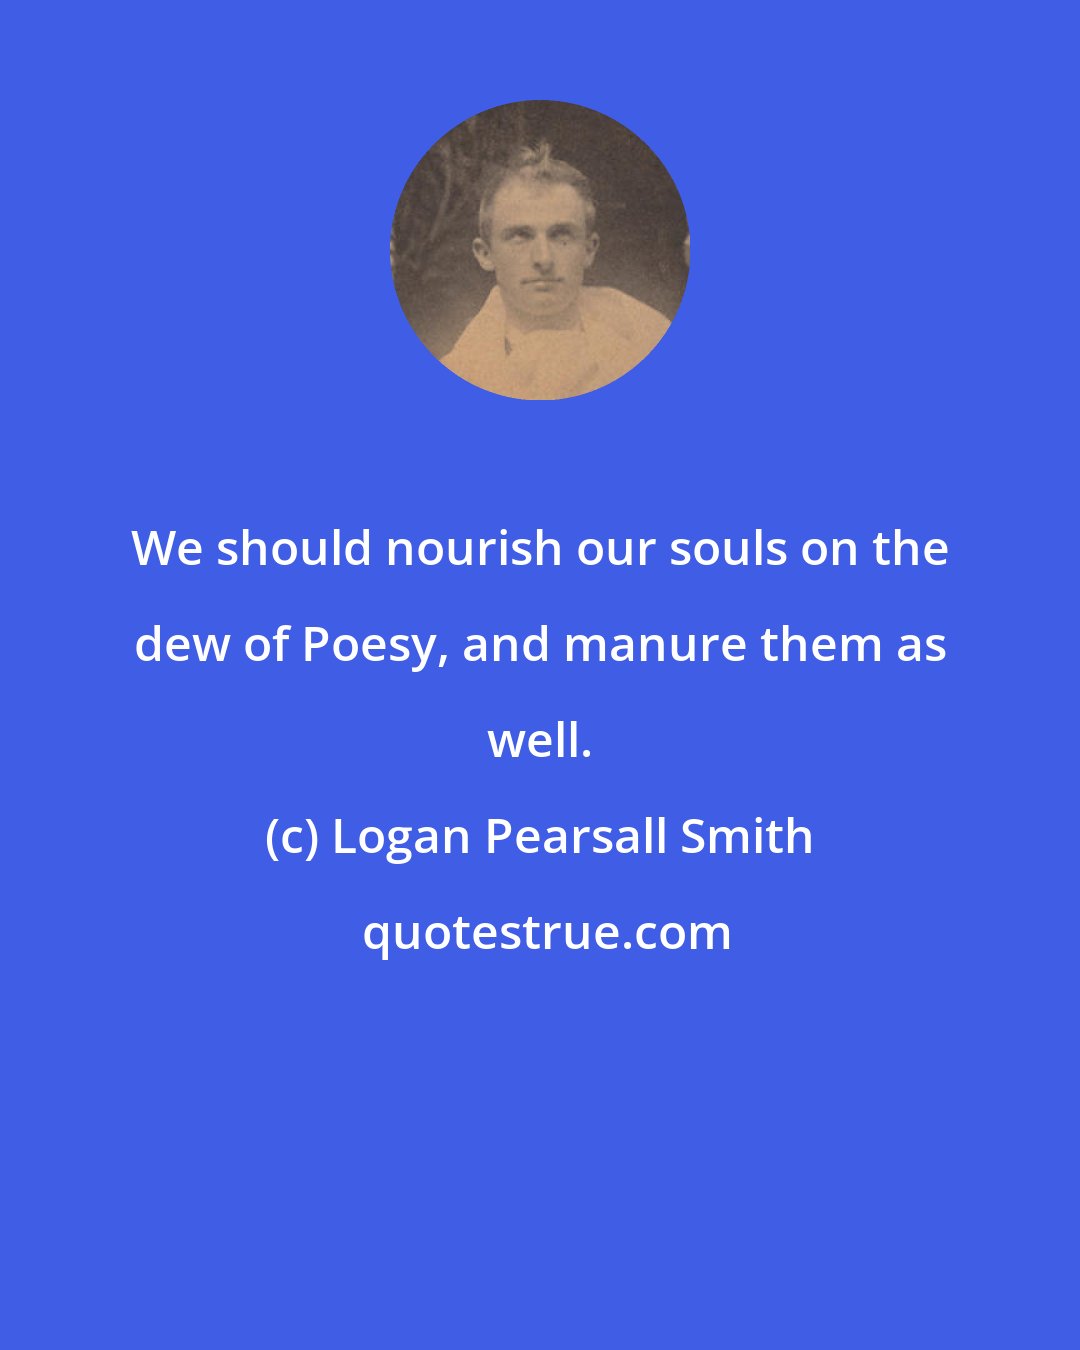 Logan Pearsall Smith: We should nourish our souls on the dew of Poesy, and manure them as well.